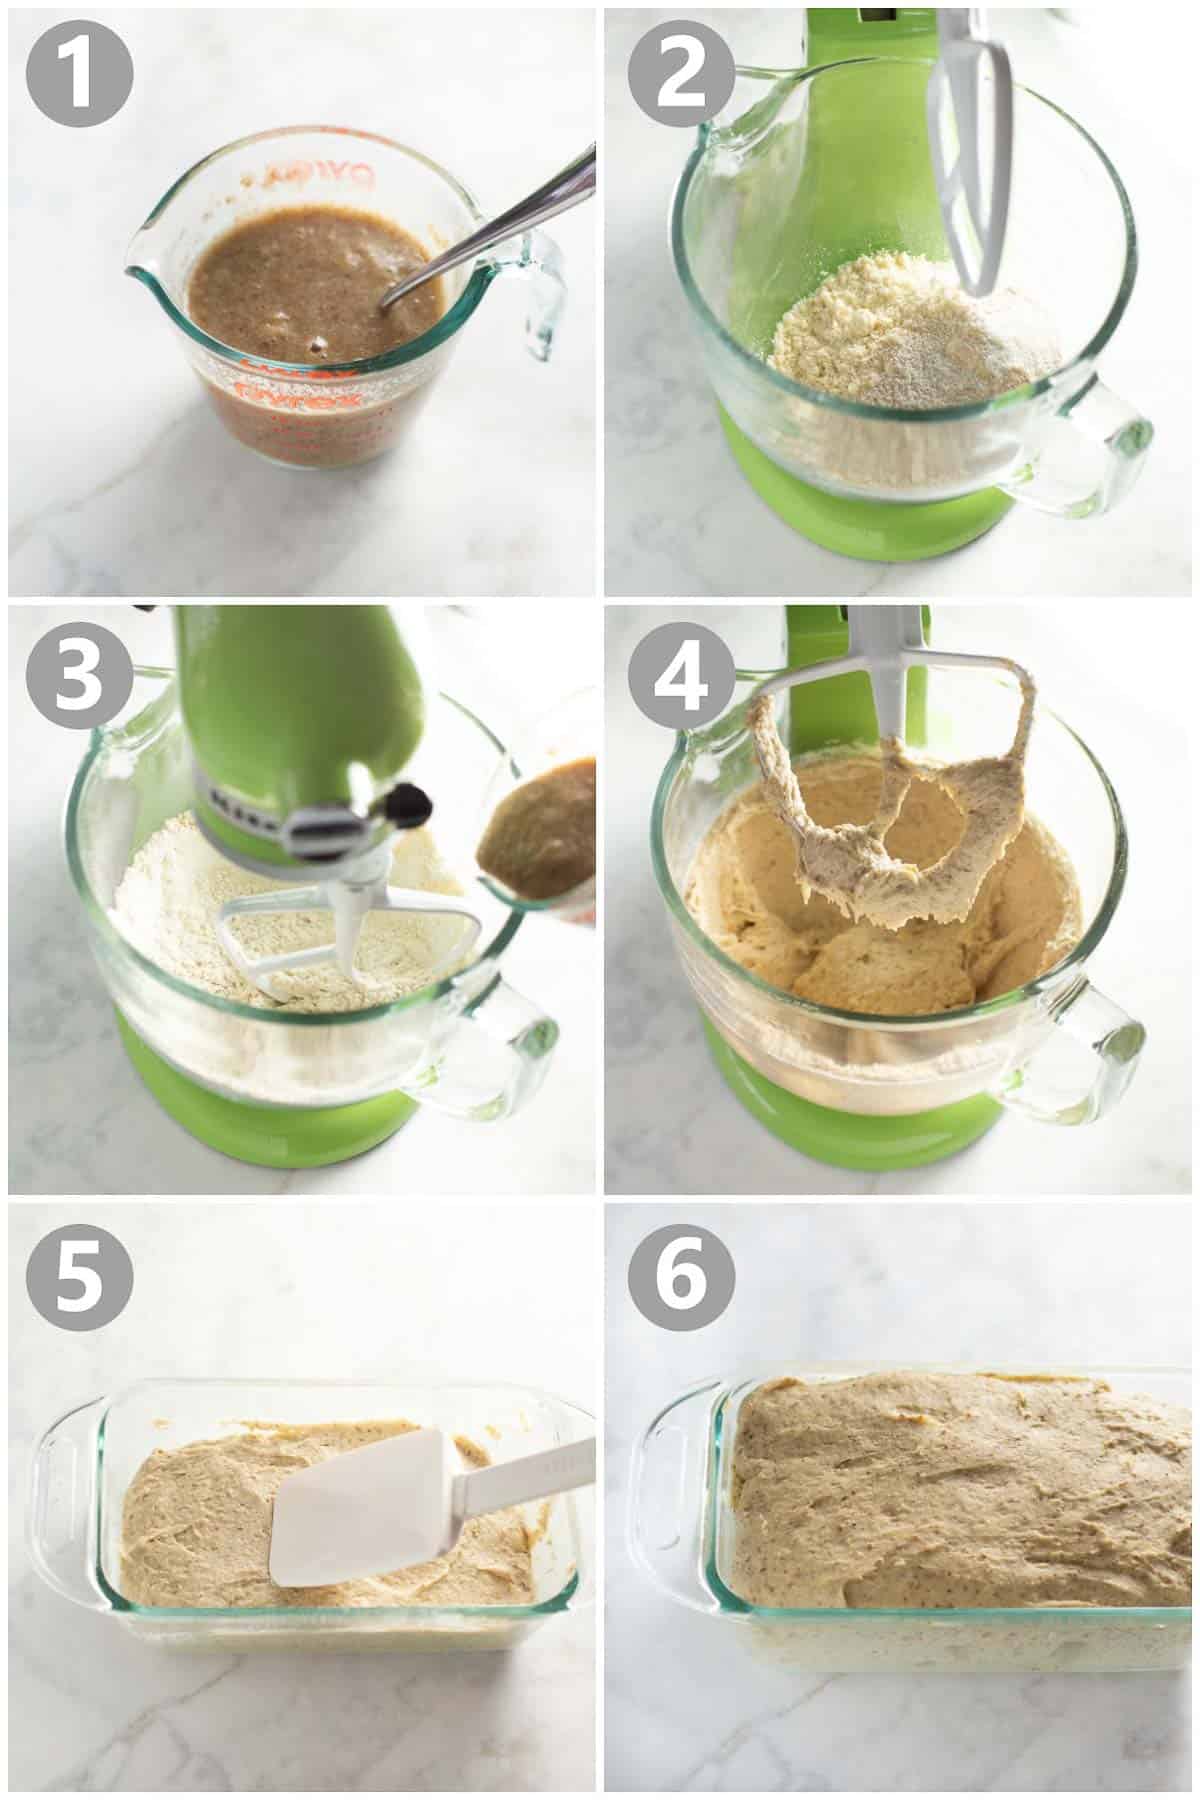 step by step instructions for how to make gluten free bread